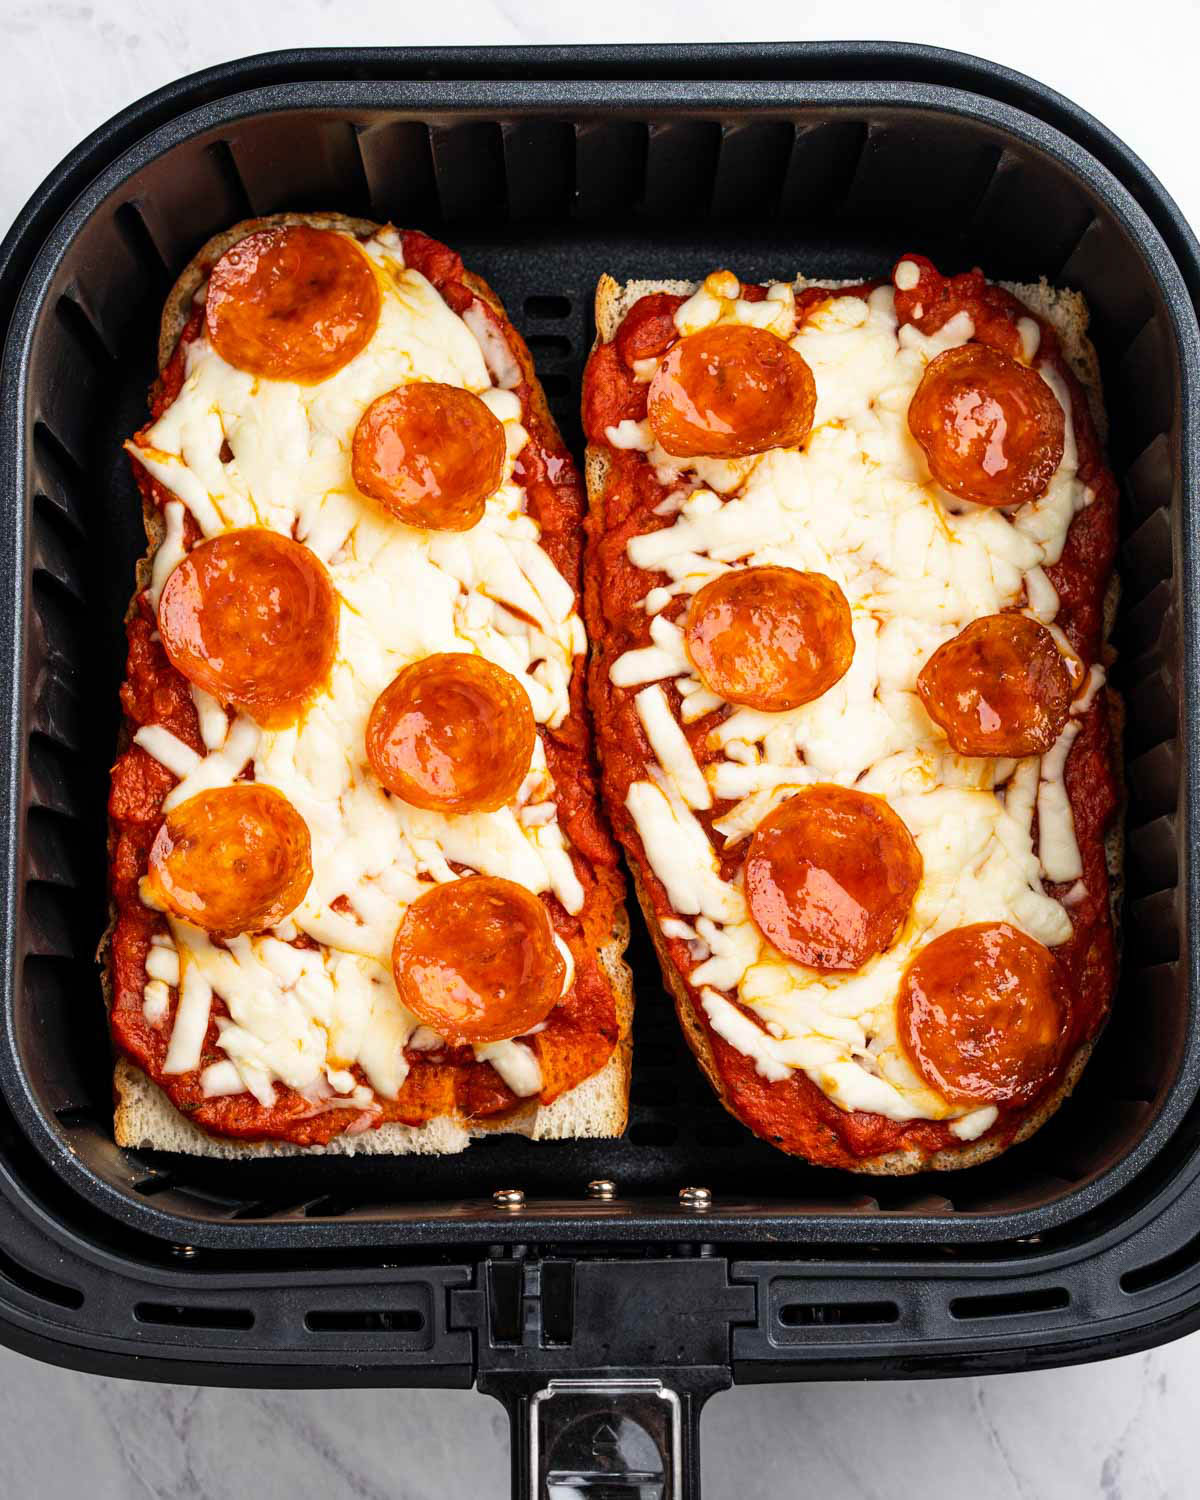 An air fryer is displayed, containing two cooked French bread pizzas. 